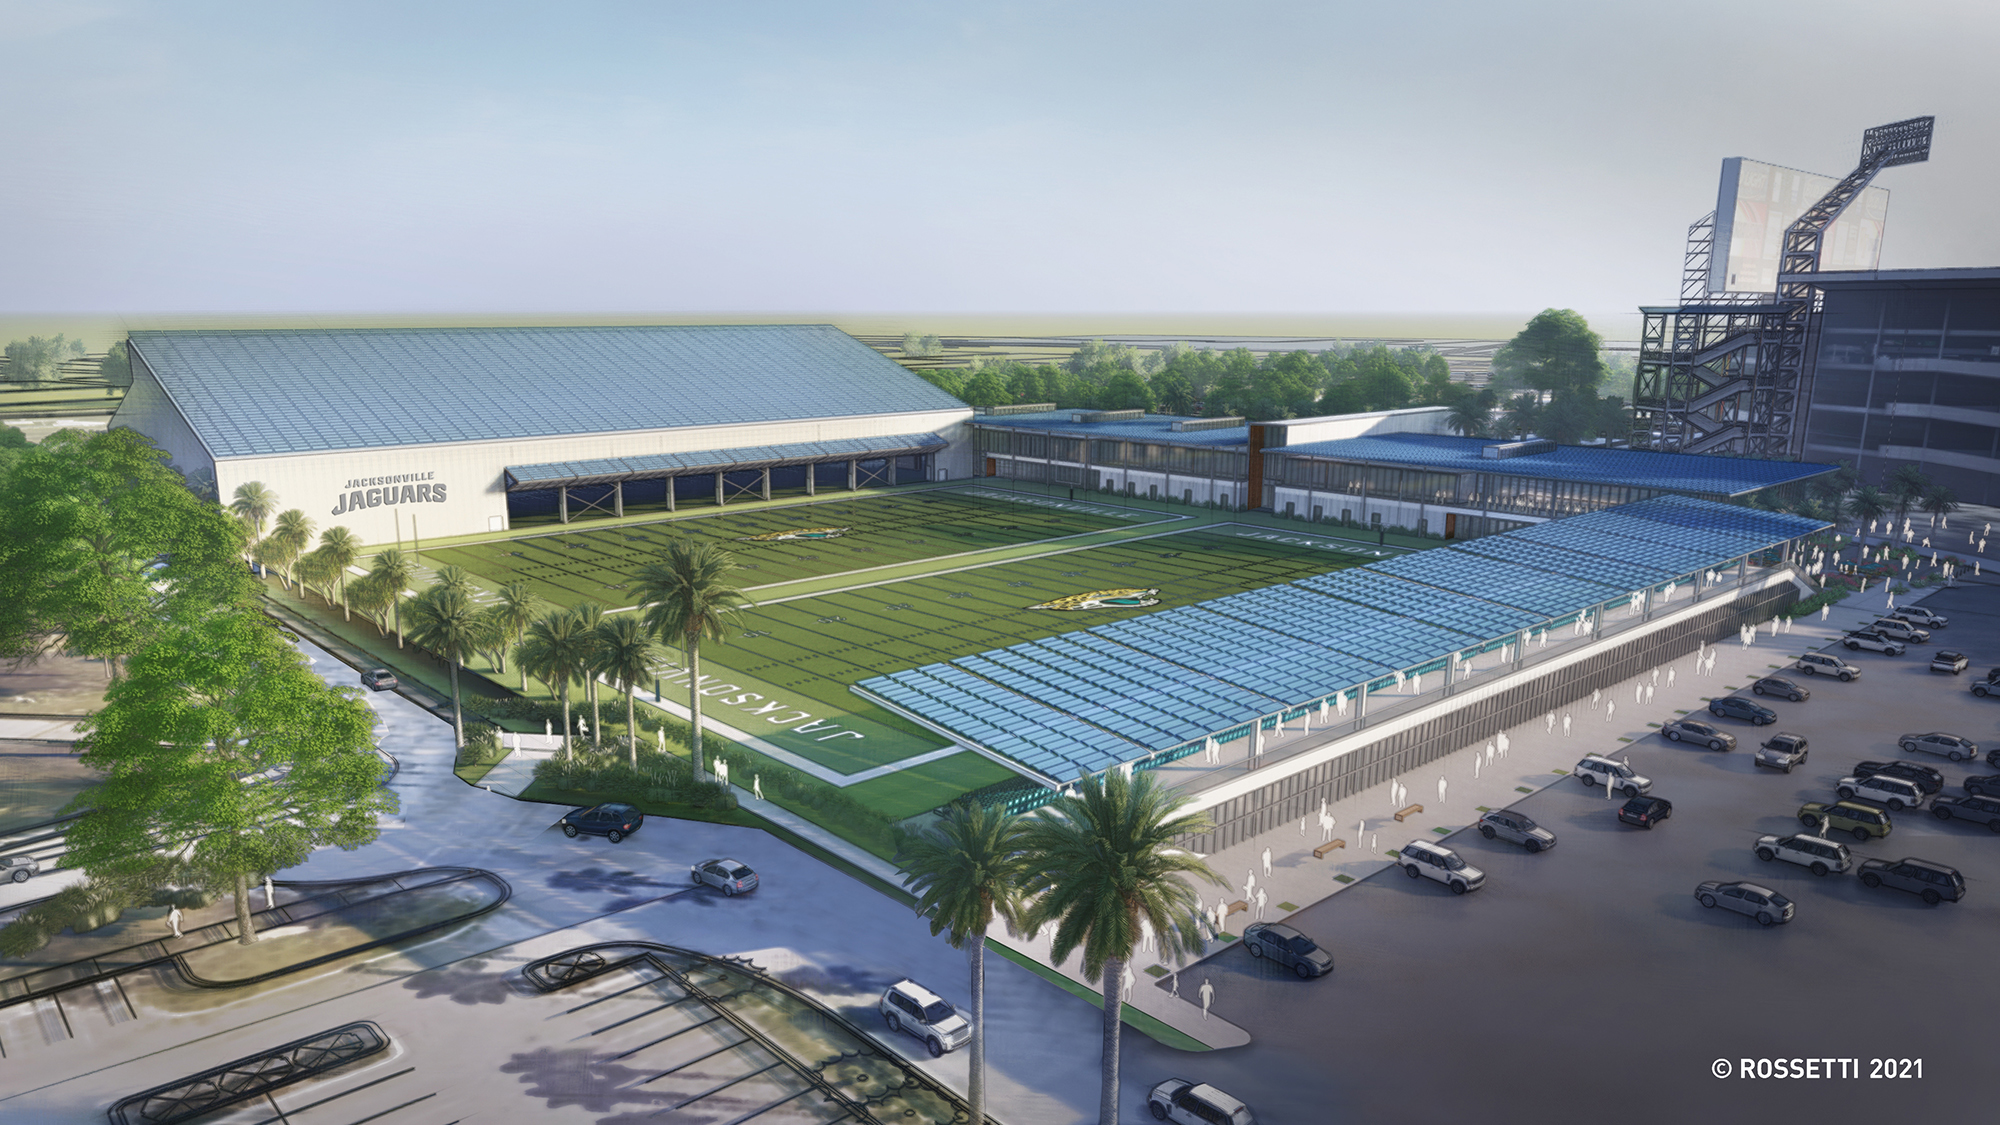 The football performance center is planned at the northwest side of TIAA Bank Field near Gate 2.